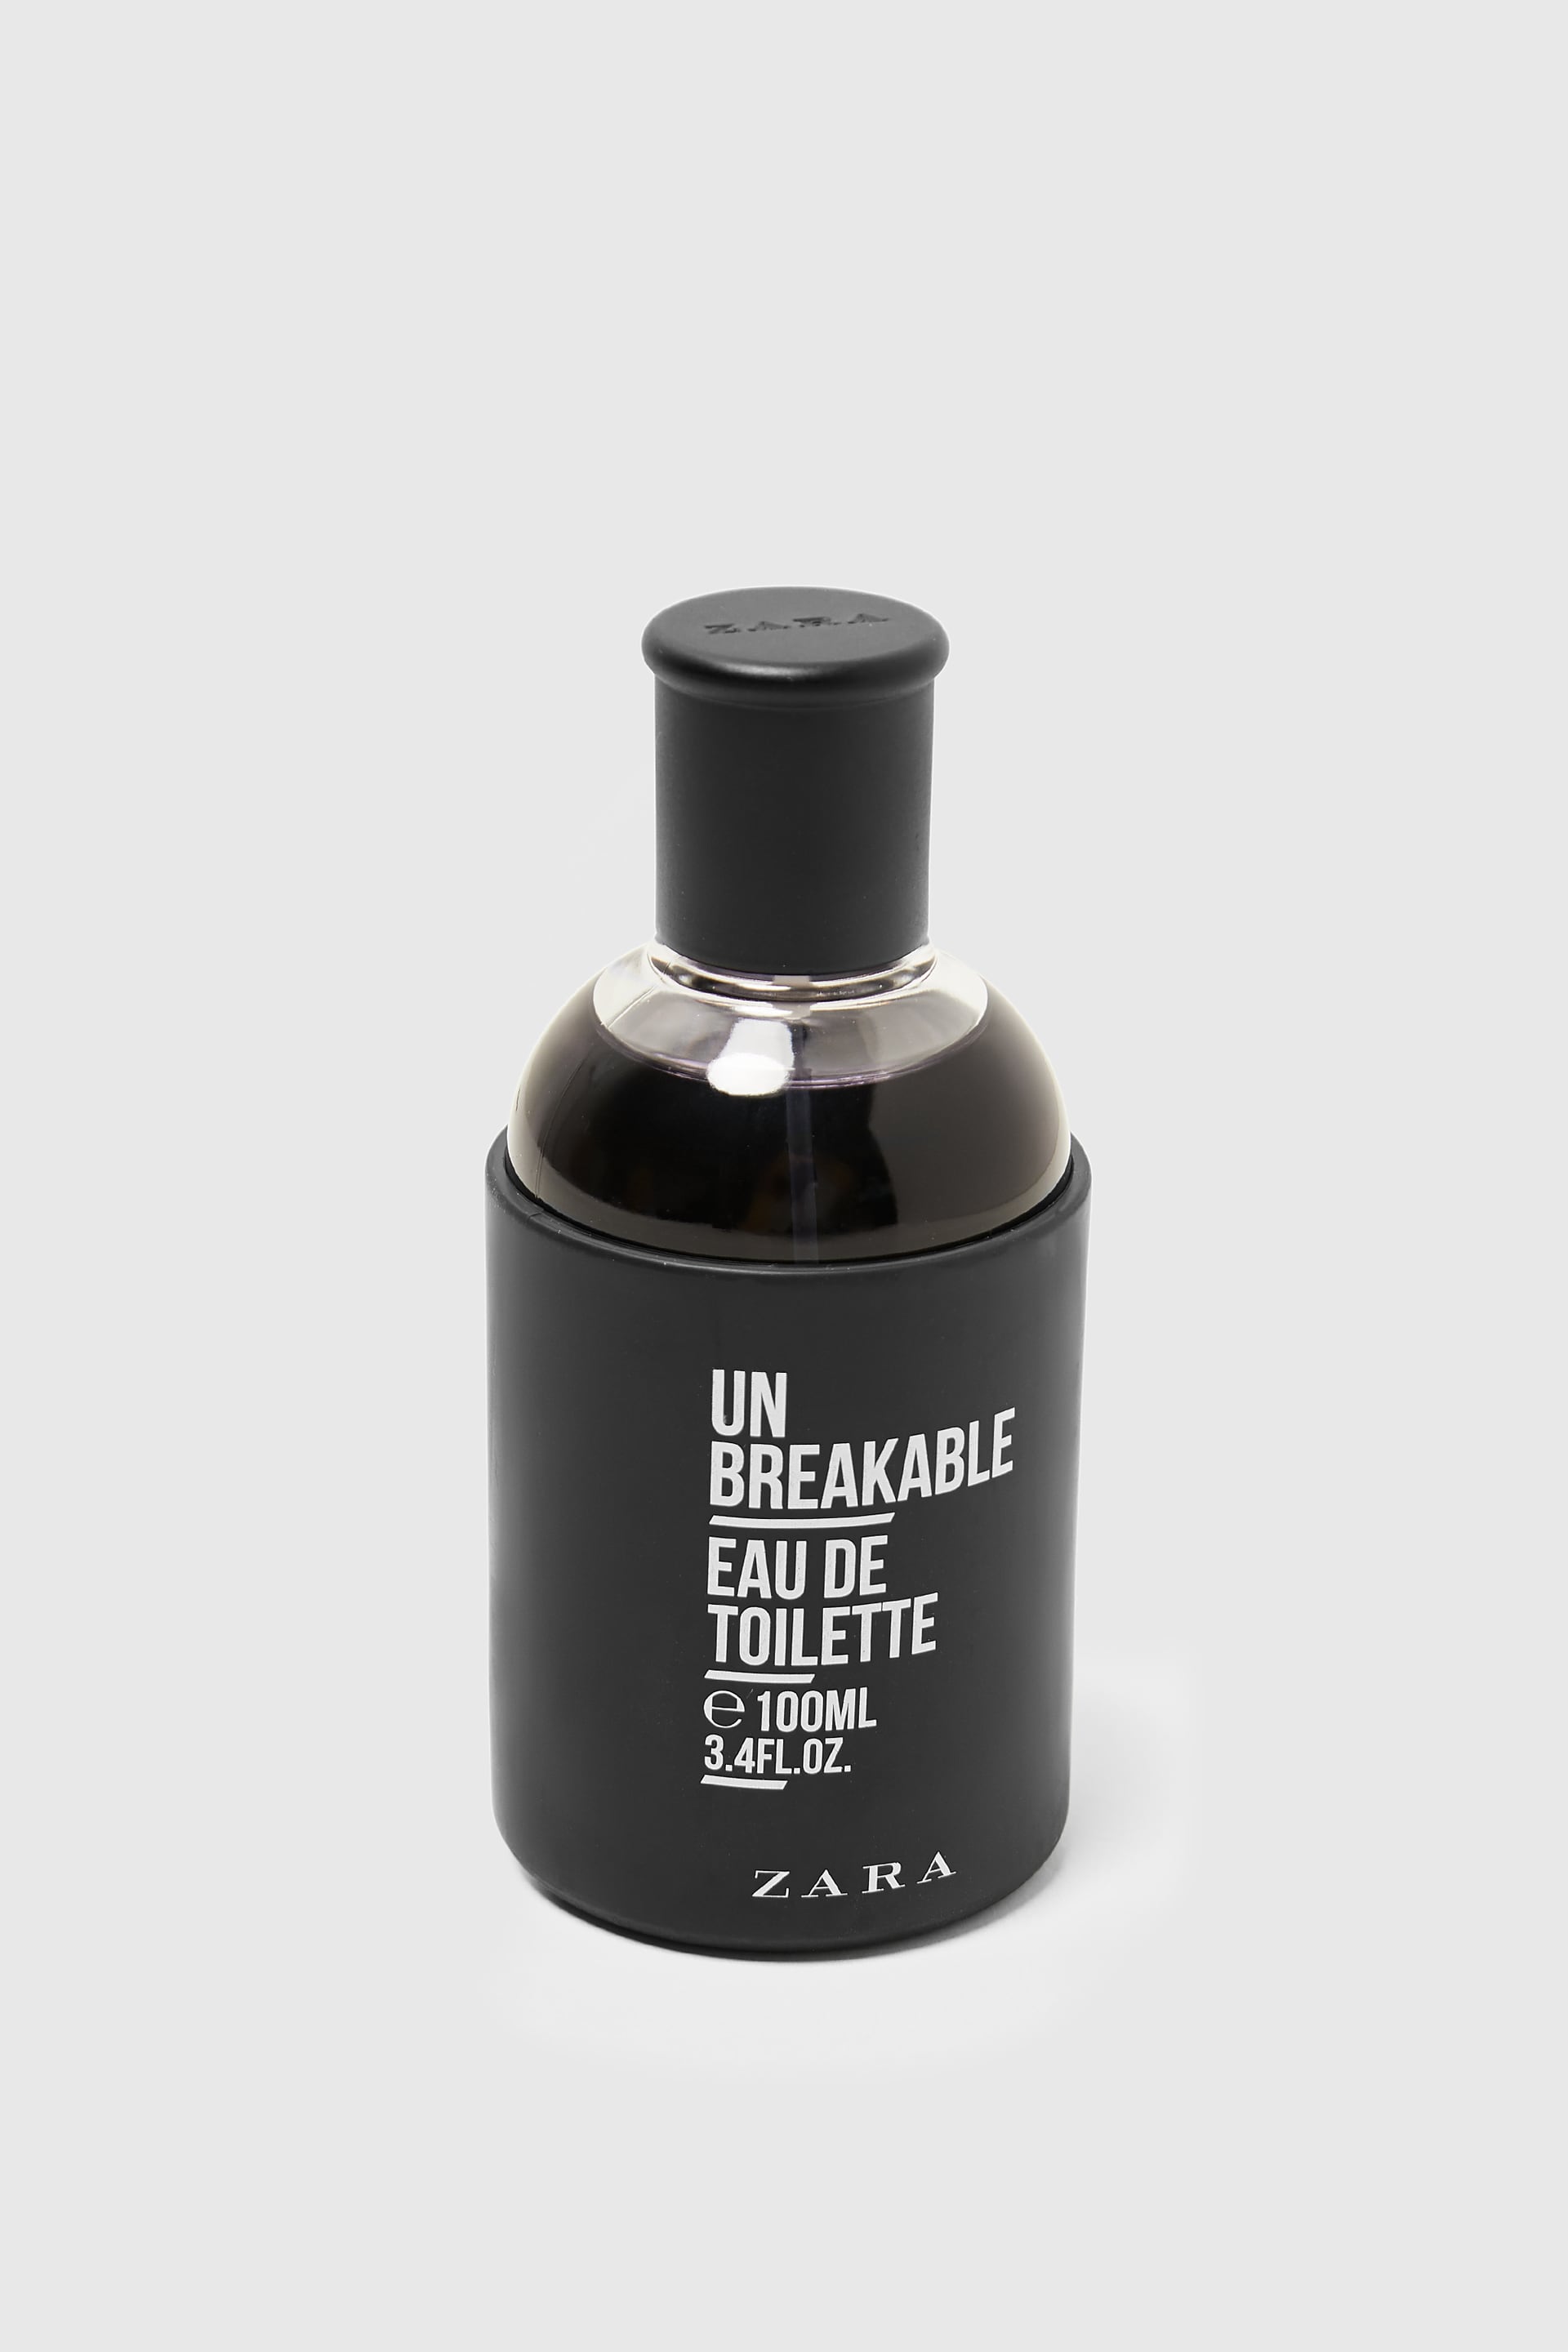 Unbreakable Zara cologne - a new 